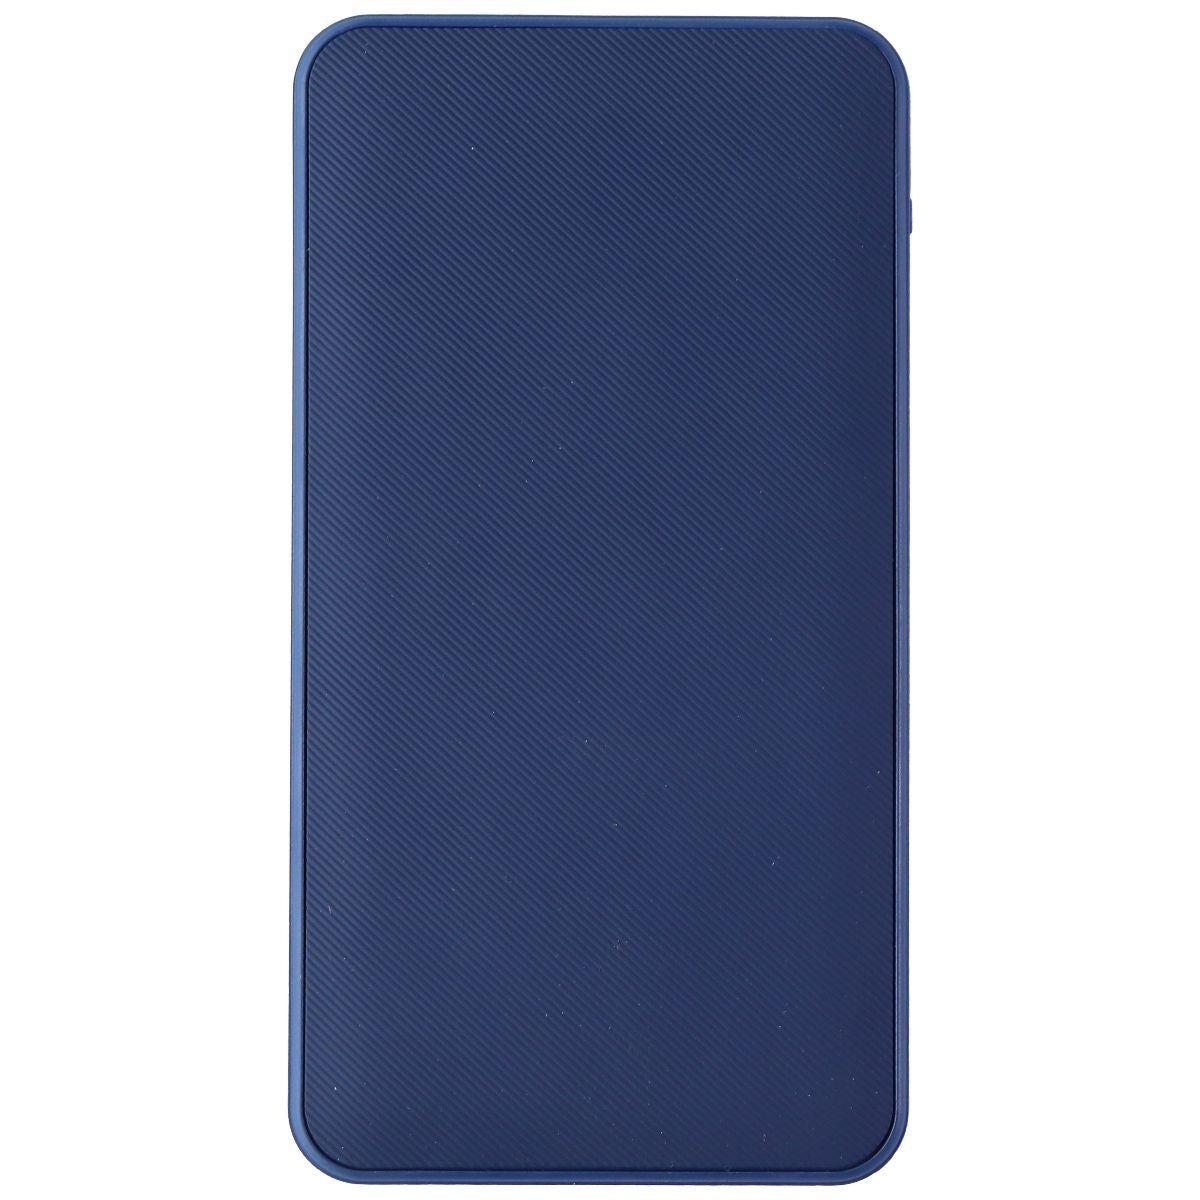 Mophie 8,000mAh Portable USB-C and USB Dual Charger - Blue